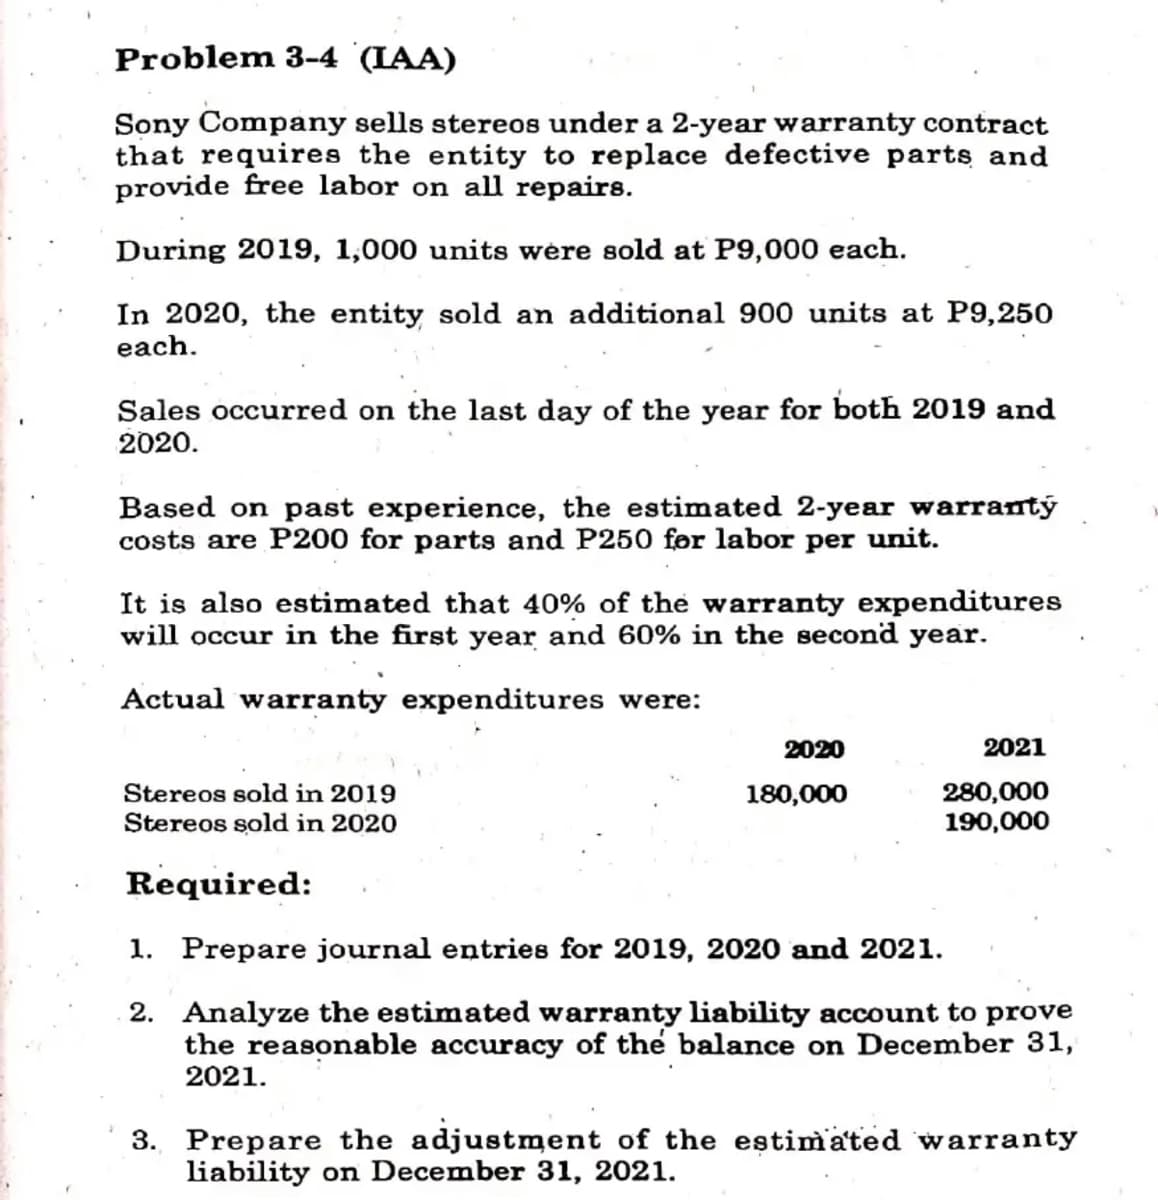 Problem 3-4 (IAA)
Sony Company sells stereos under a 2-year warranty contract
that requires the entity to replace defective parts and
provide free labor on all repairs.
During 2019, 1,000 units wère sold at P9,000 each.
In 2020, the entity sold an additional 900 units at P9,250
each.
Sales occurred on the last day of the year for both 2019 and
2020.
Based on past experience, the estimated 2-year warrantý
costs are P200 for parts and P250 for labor per unit.
It is also estimated that 40% of the warranty expenditures
will occur in the first year and 60% in the second year.
Actual warranty expenditures were:
2020
2021
280,000
190,000
Stereos sold in 2019
180,000
Stereos sold in 2020
Required:
1. Prepare journal entries for 2019, 2020 and 2021.
2. Analyze the estimated warranty liability account to prove
the reasonable accuracy of the balance on December 31,
2021.
3. Prepare the adjustment of the eştimated warranty
liability on December 31, 2021.
